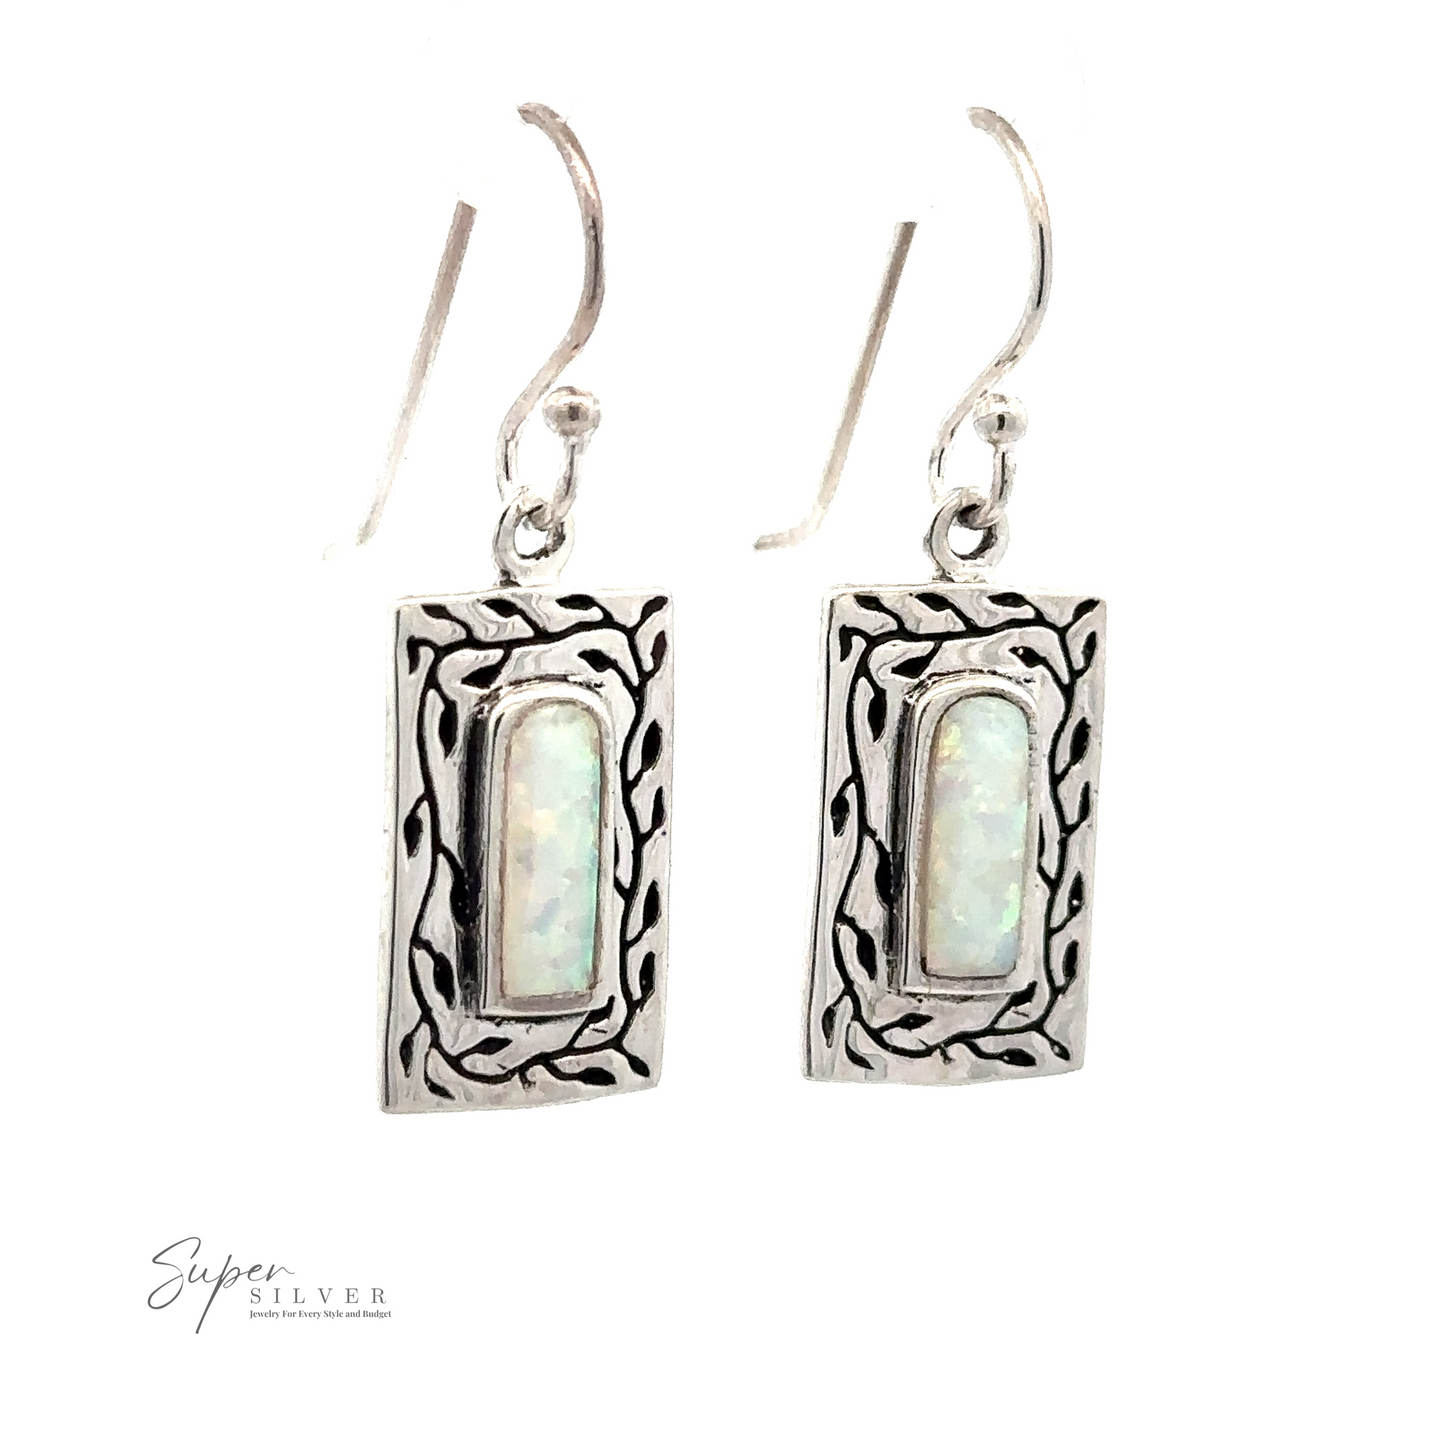 White Created Opal Square Earrings feature an intricate border design and a central lab-created opal gemstone.